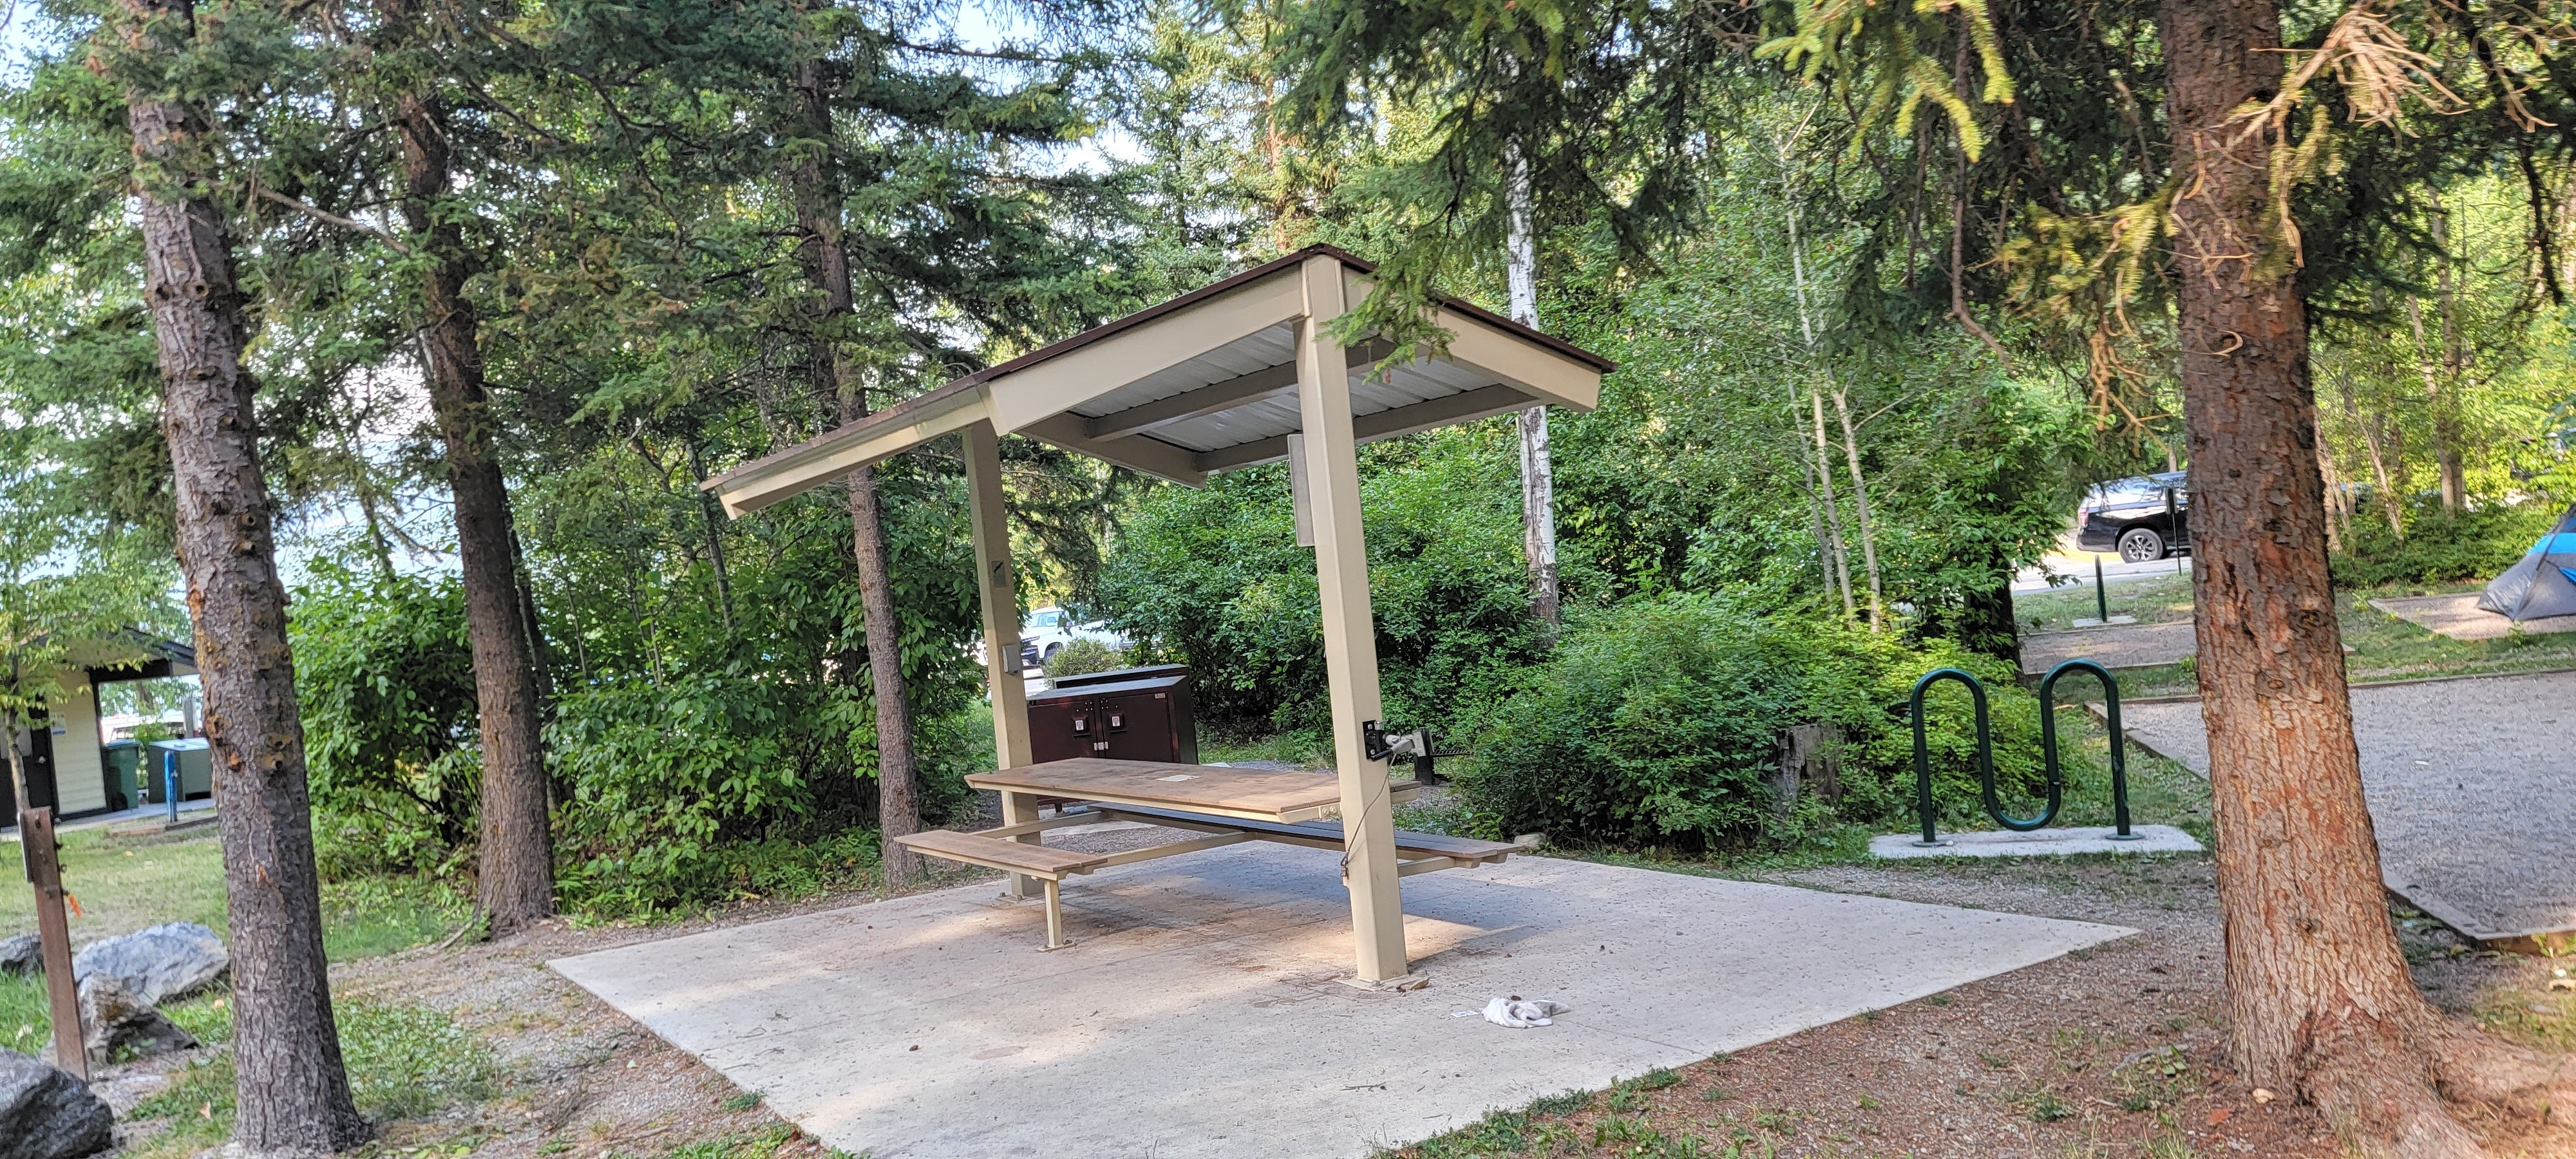 Camper submitted image from Whitefish Lake State Park - 5